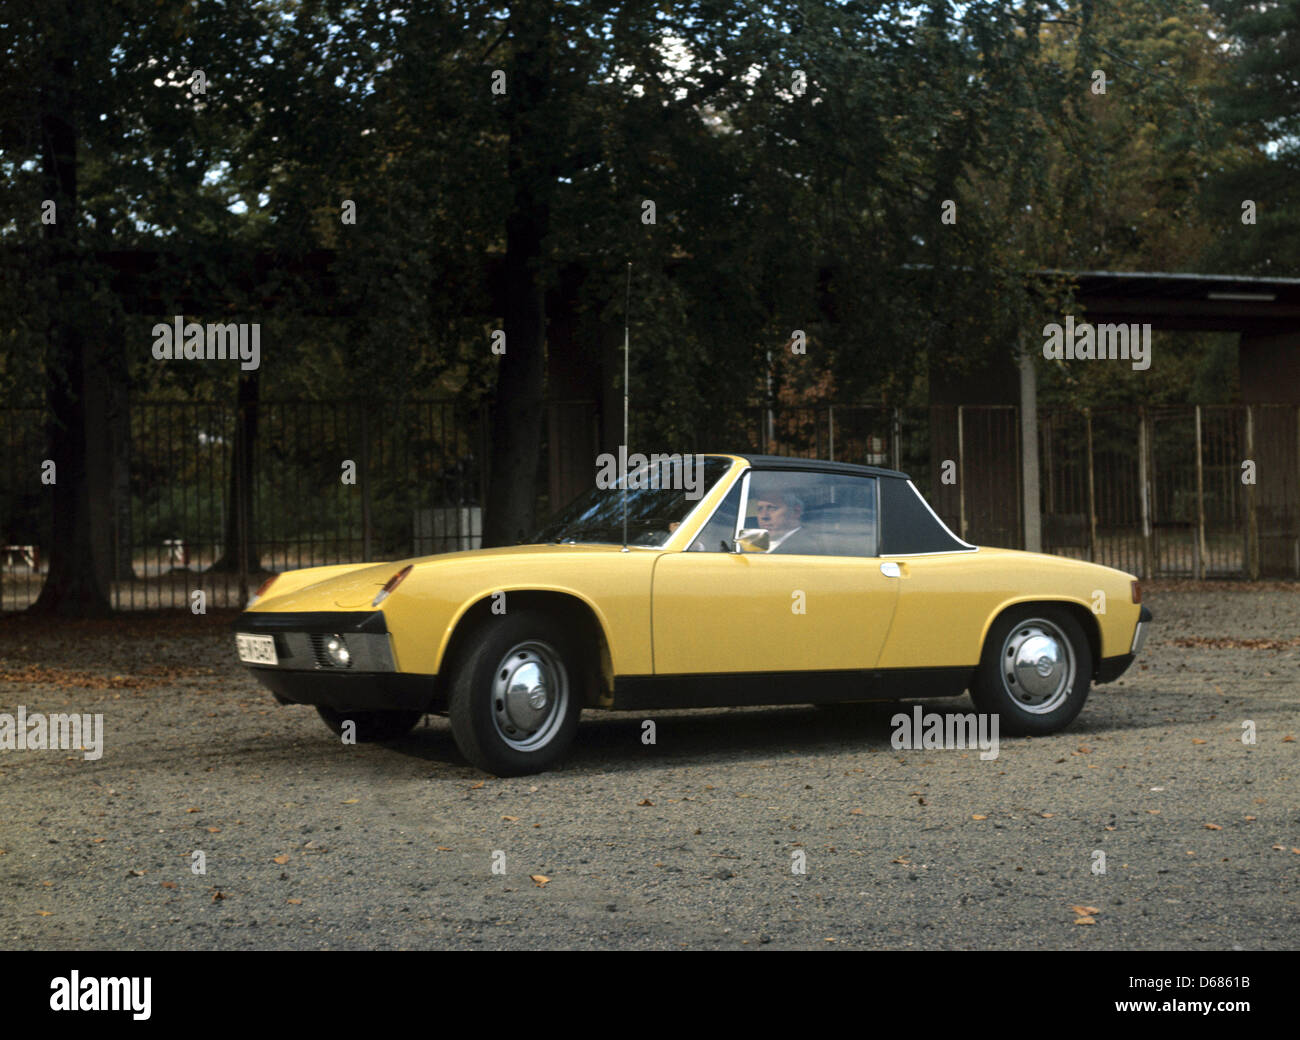 FILE - An undated archive picture shows a yellow Type 914 VW.Porsche. Porsche 914 was a joint venture of Volkswagen and Porsche and was built from the 1960s till 1976. The car used to be colloquially named as 'People's Porsche'. Car manufacturer Volkswagen (VW) is going to completely take over Porsche's sports car branch, announced VW on 04 July 2012. The takeover is to be complete Stock Photo